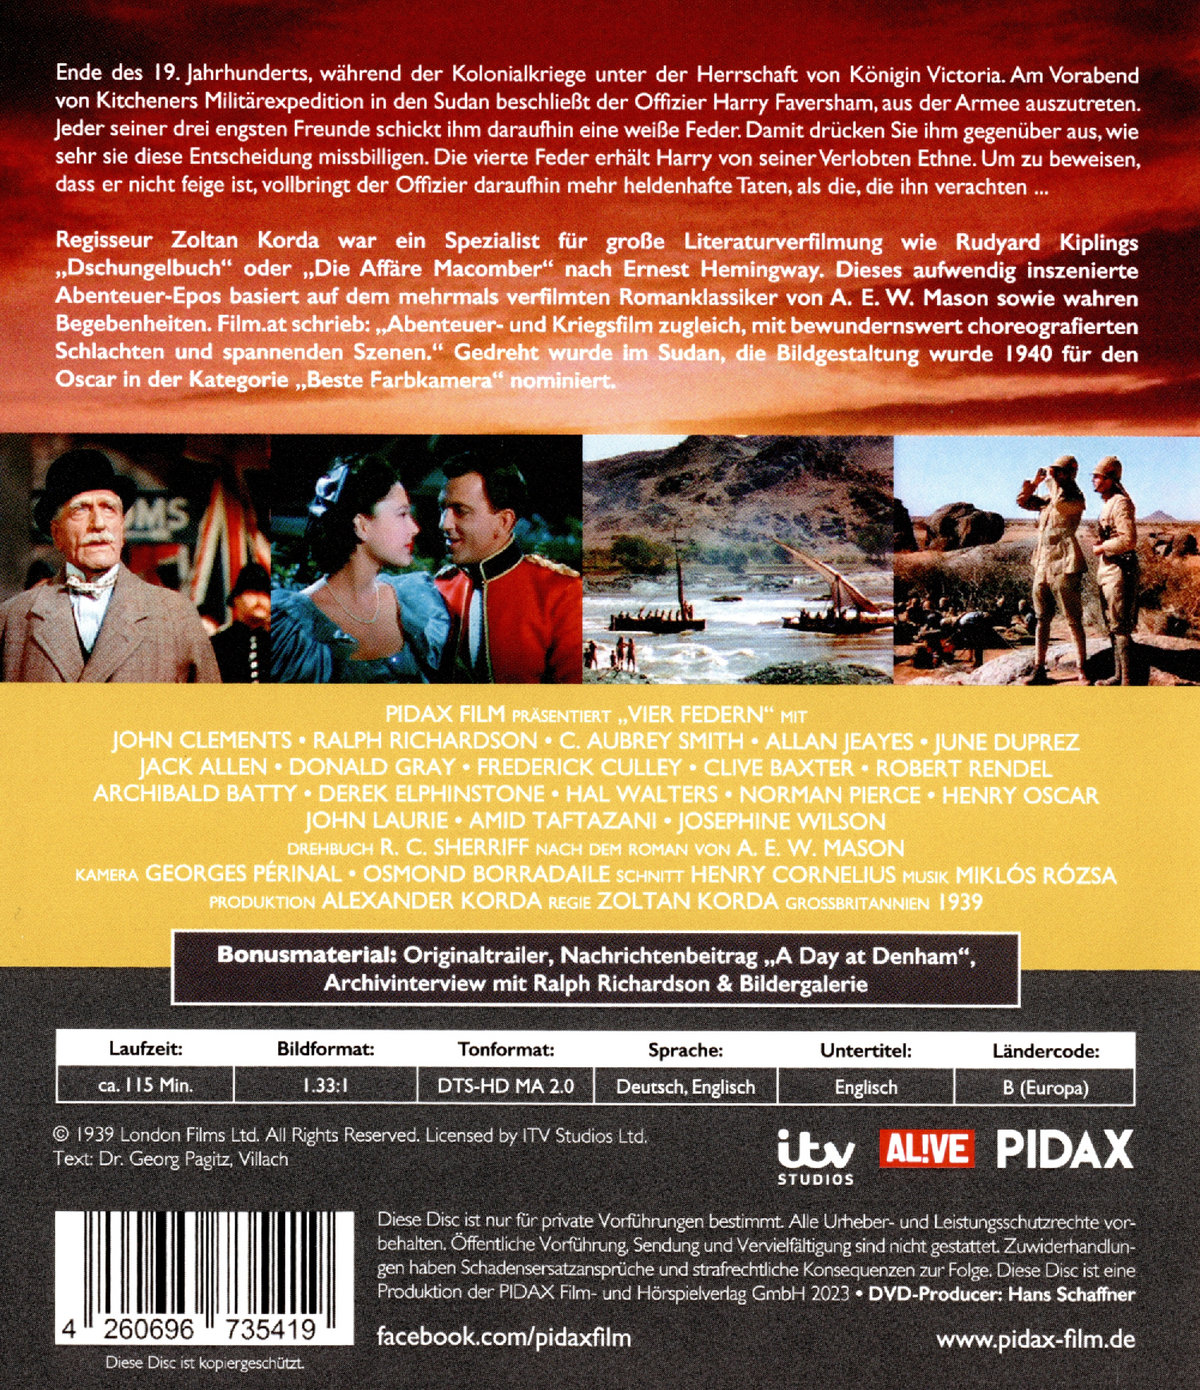 Vier Federn - The Four Feathers - (blu-ray)